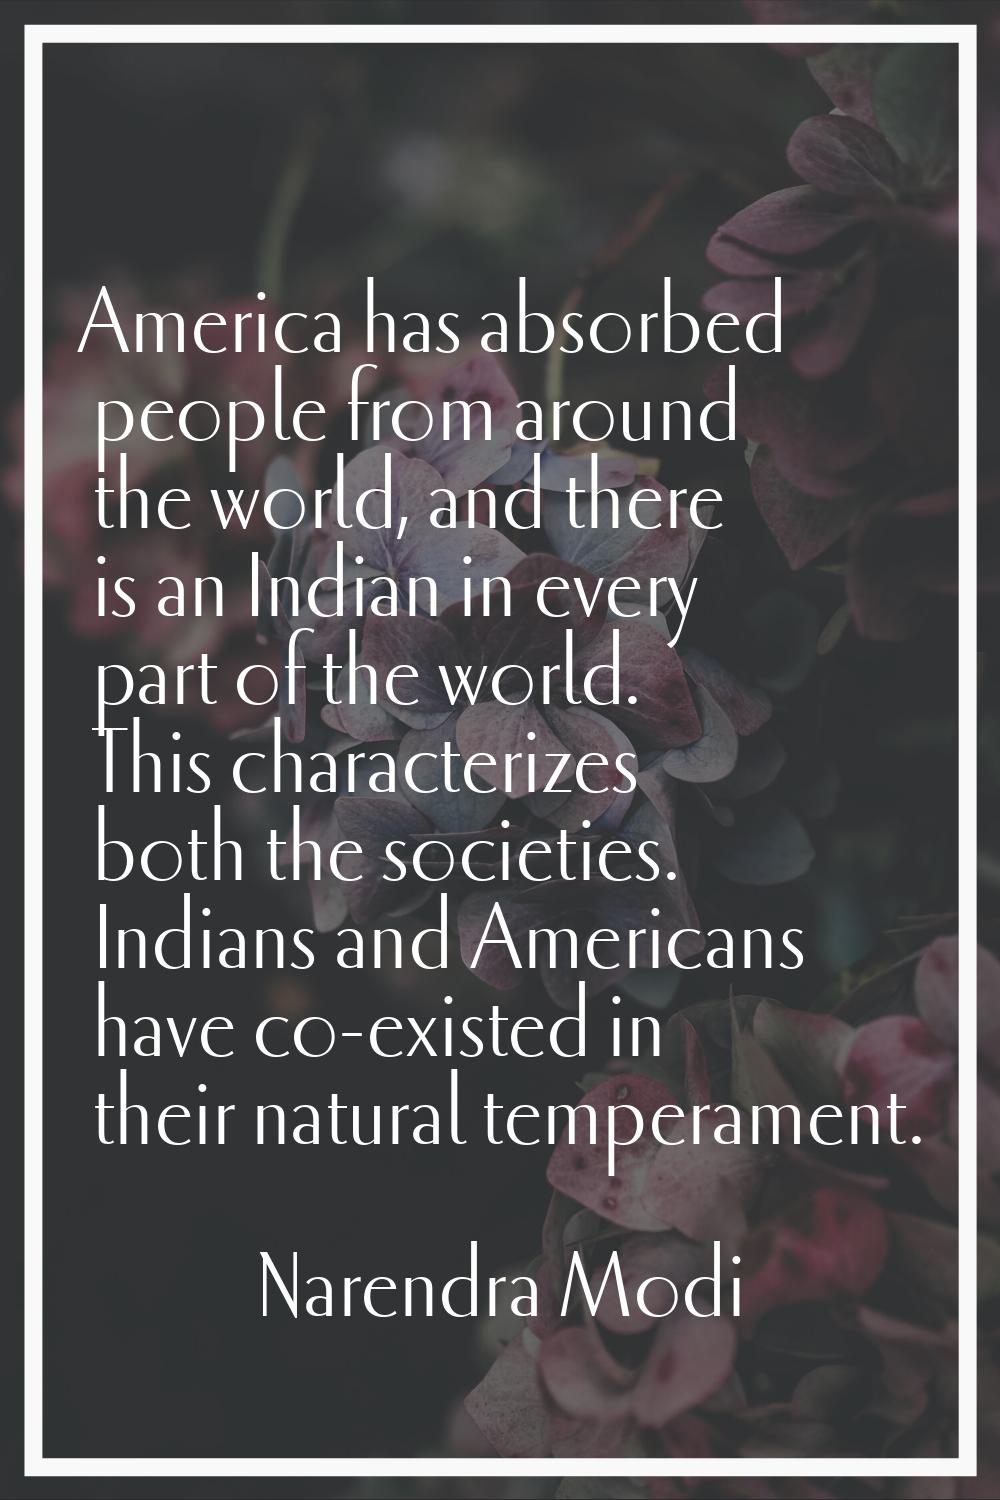 America has absorbed people from around the world, and there is an Indian in every part of the worl